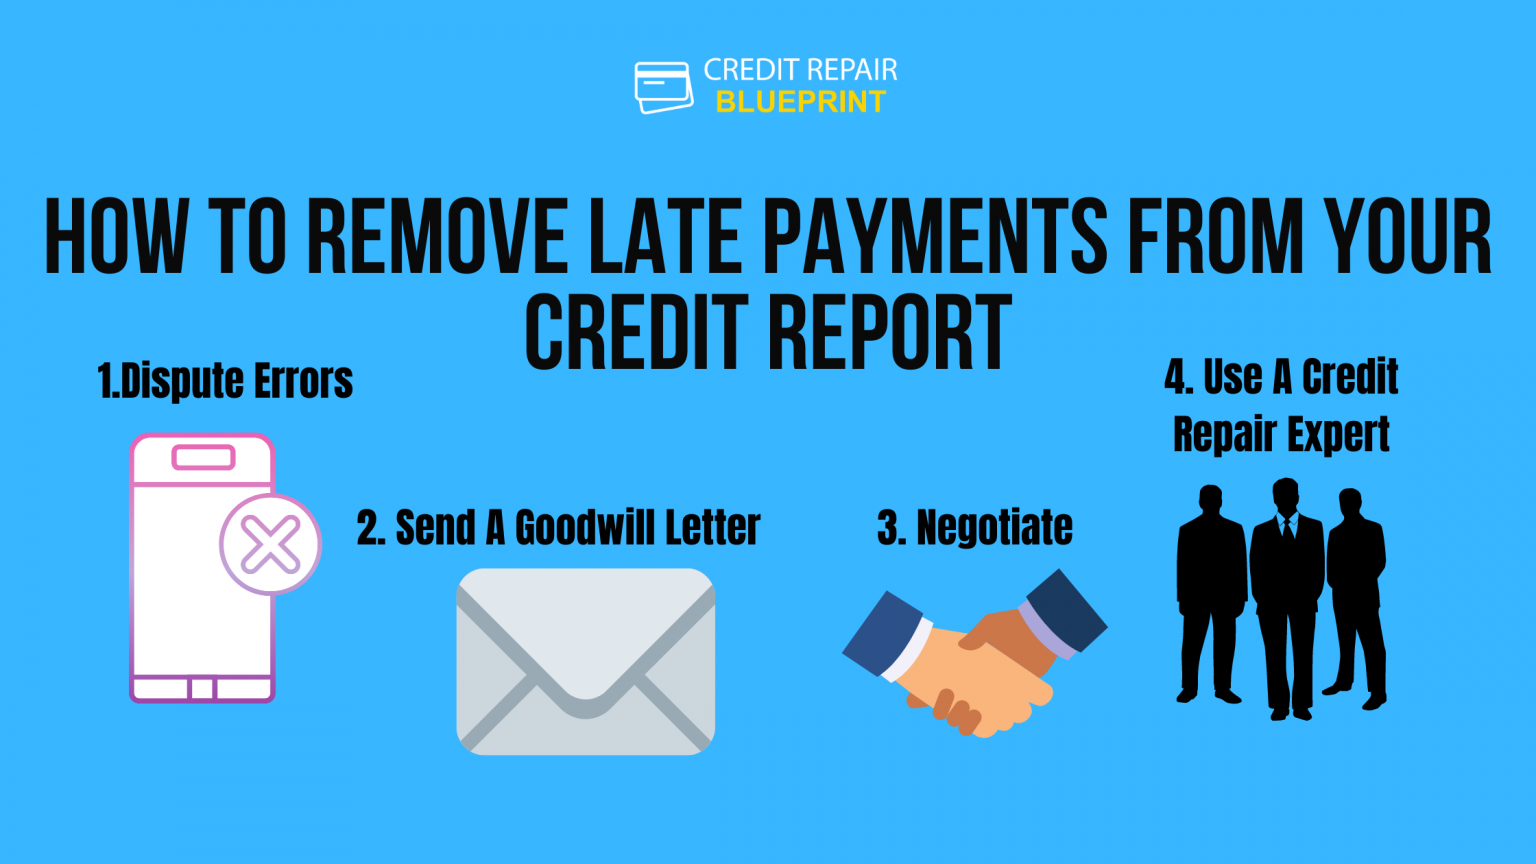 Can Creditors Remove Late Payments From Credit Report?